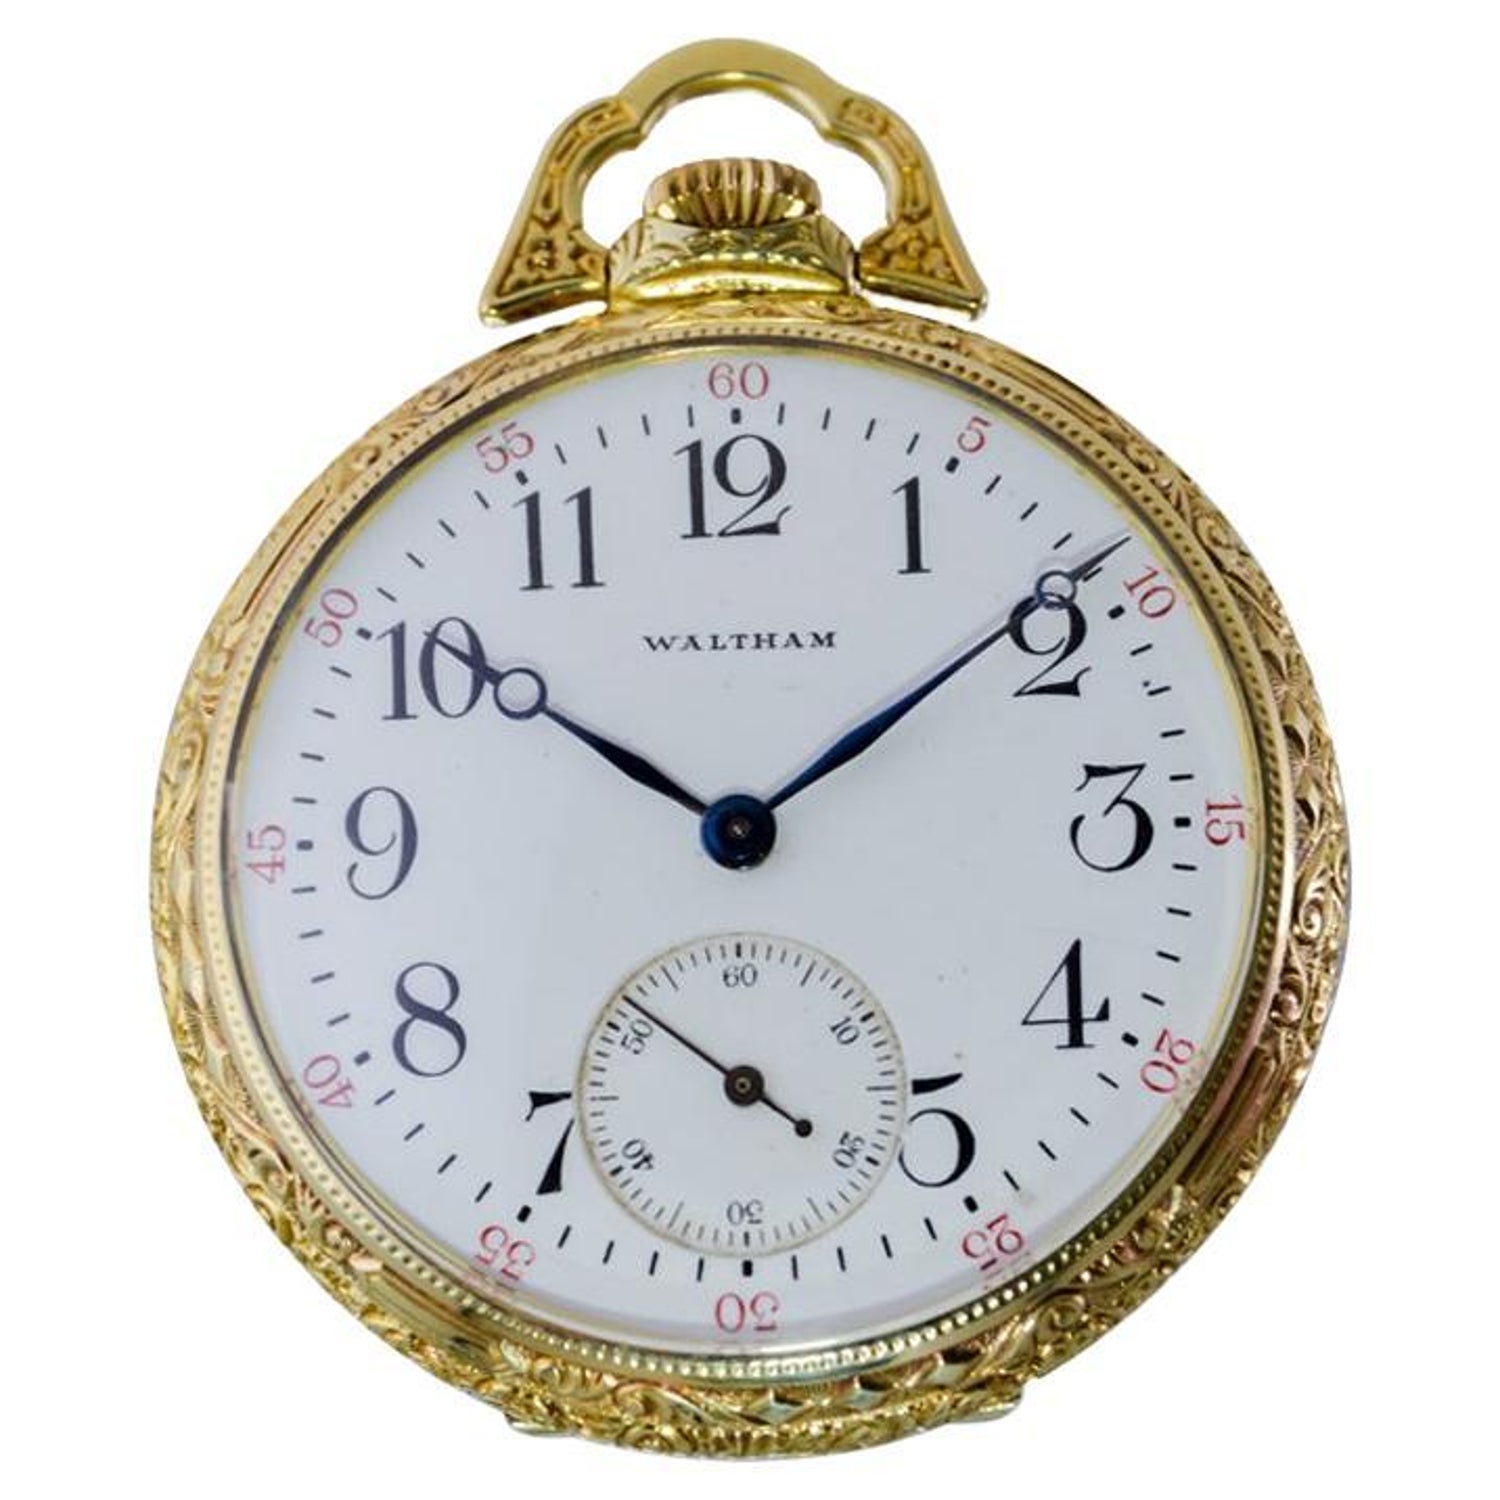 Waltham 1908 - 4 For Sale on 1stDibs | waltham gold nugget watch